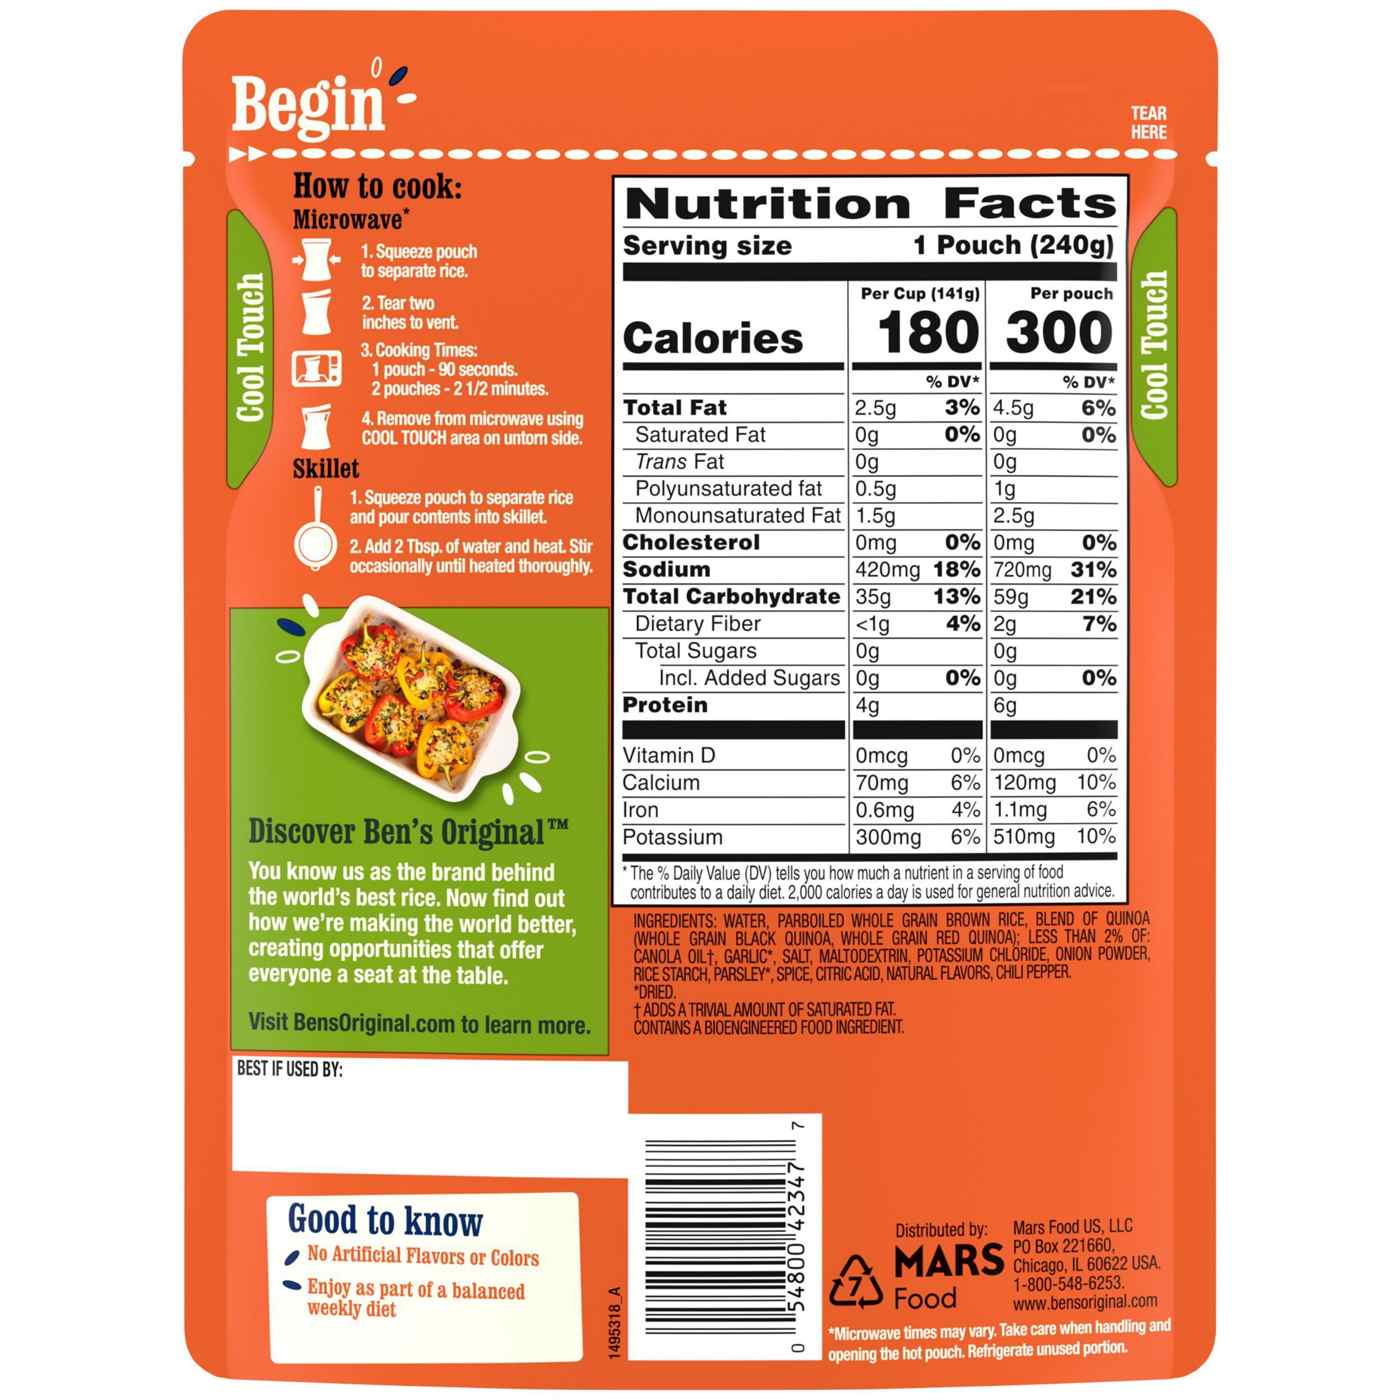 Ben's Original Ready Rice Whole Grain Medley Quinoa and Brown Flavored Rice; image 2 of 2